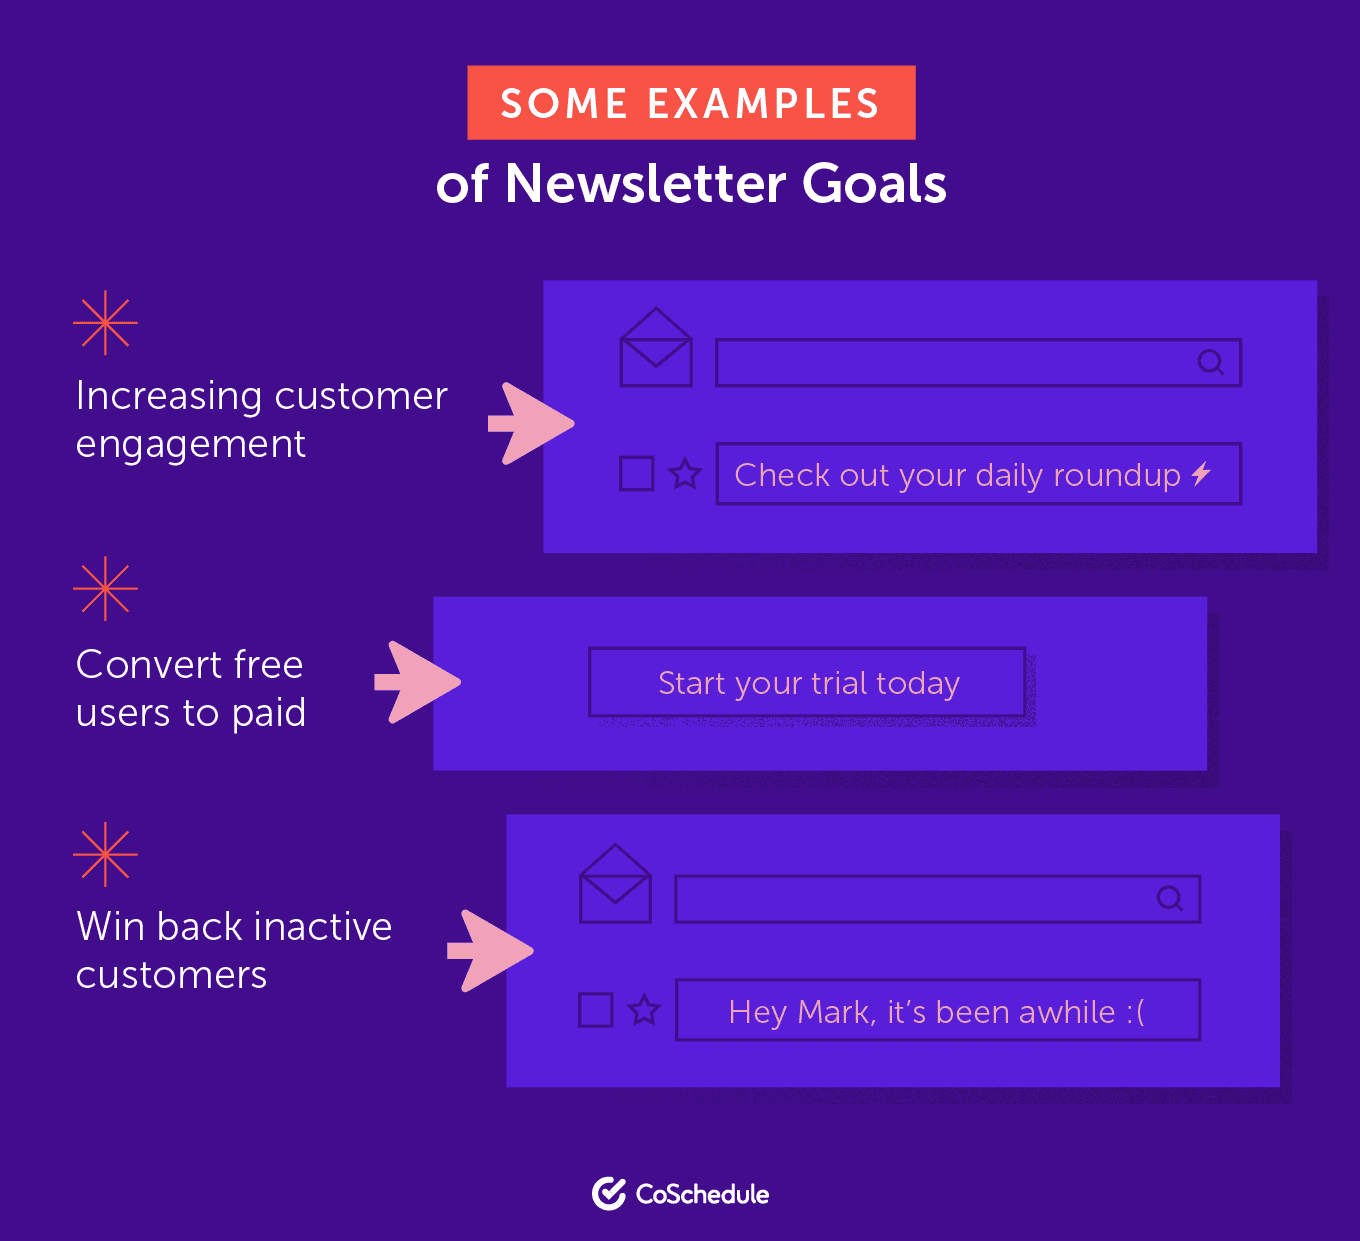 Some examples of newsletter goals